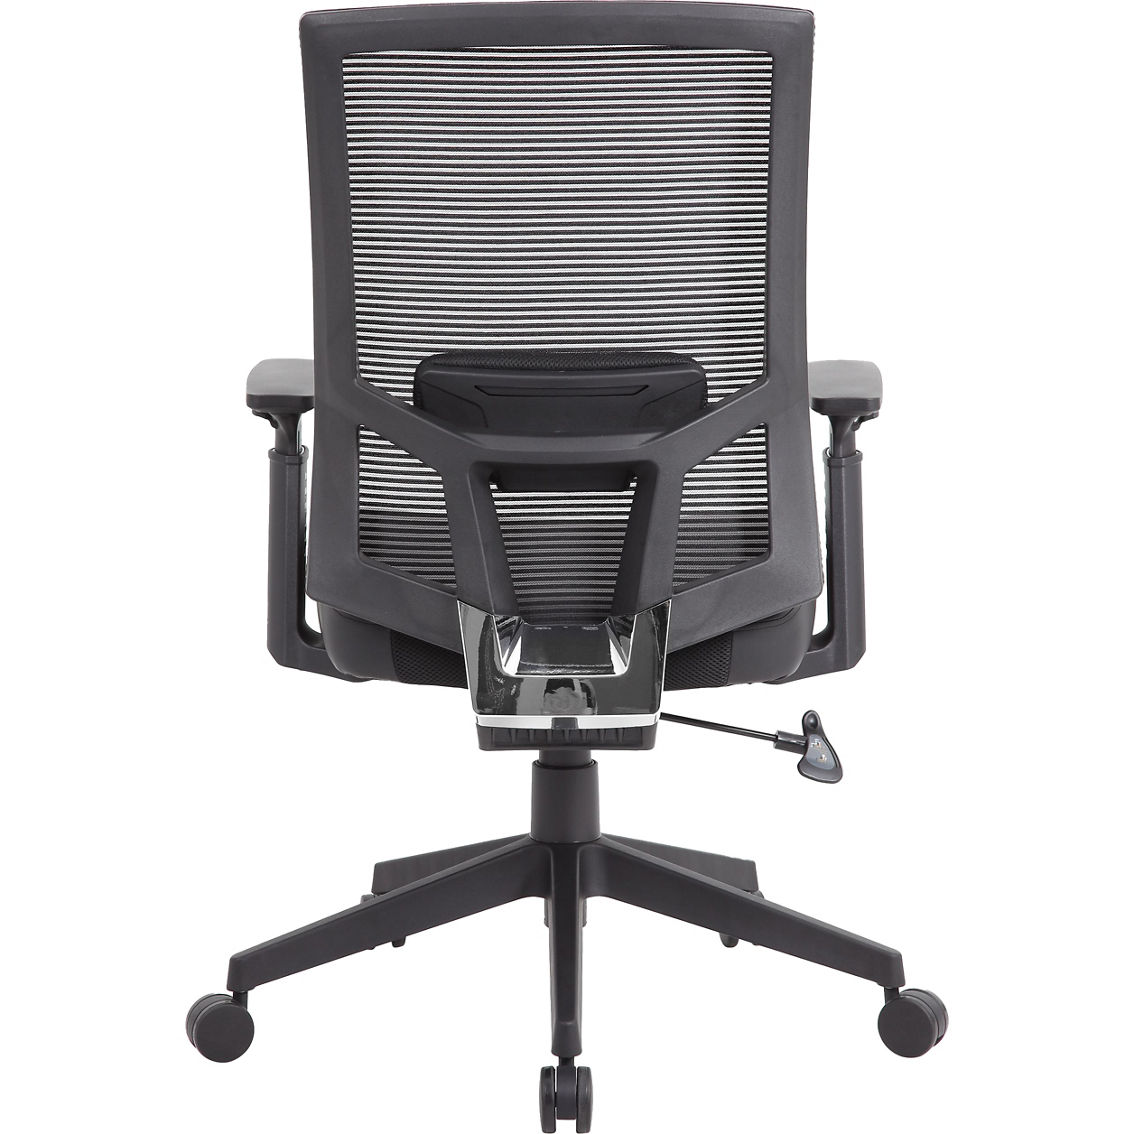 Presidential Seating Mesh Back Task Chair - Image 2 of 3